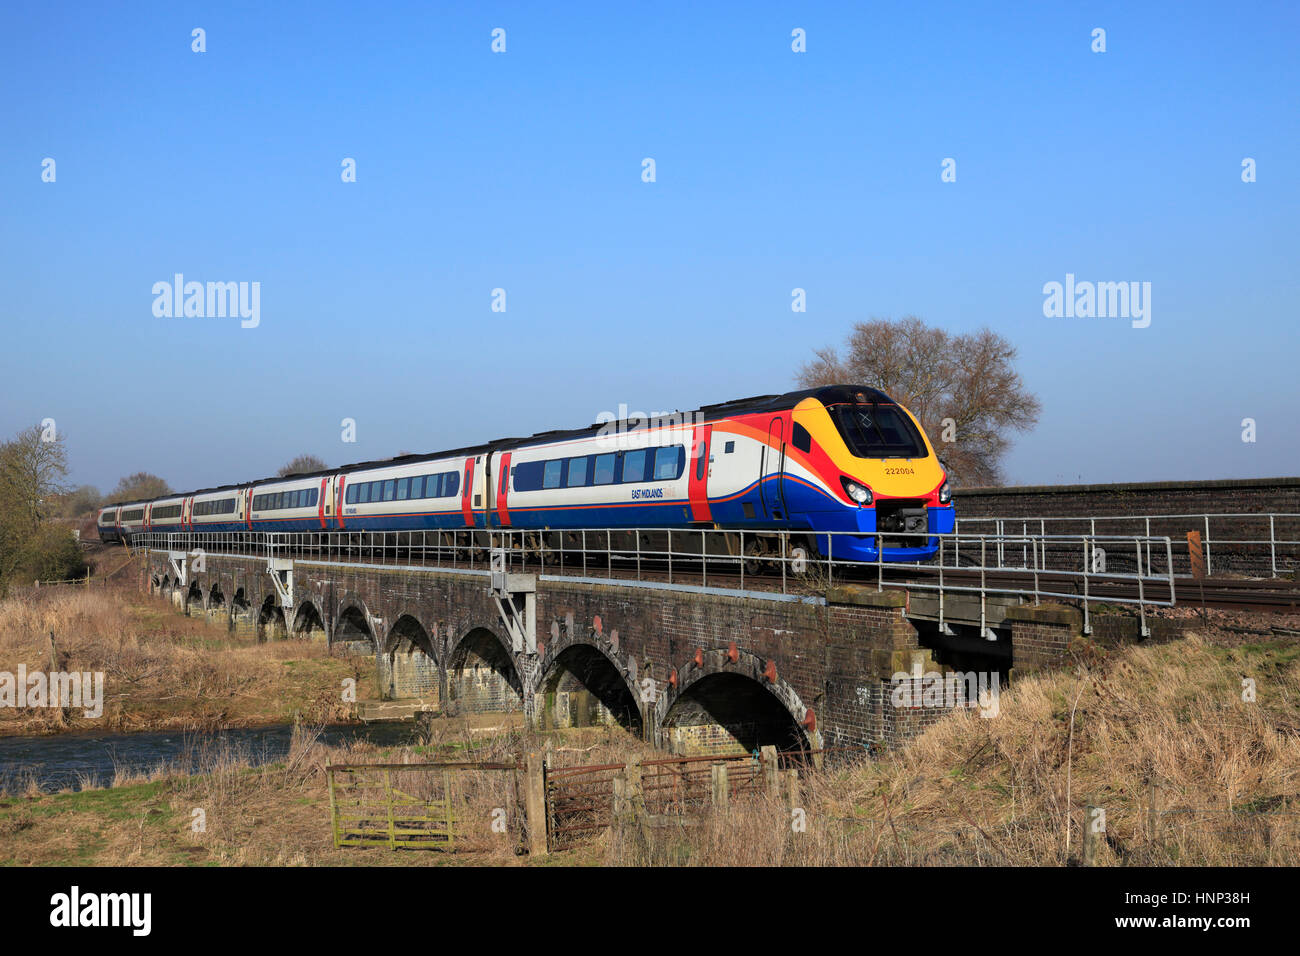 Meridian class 222 004 train, East Midlands Trains livery, between Bedford  and Luton, Bedfordshire, England Stock Photo - Alamy